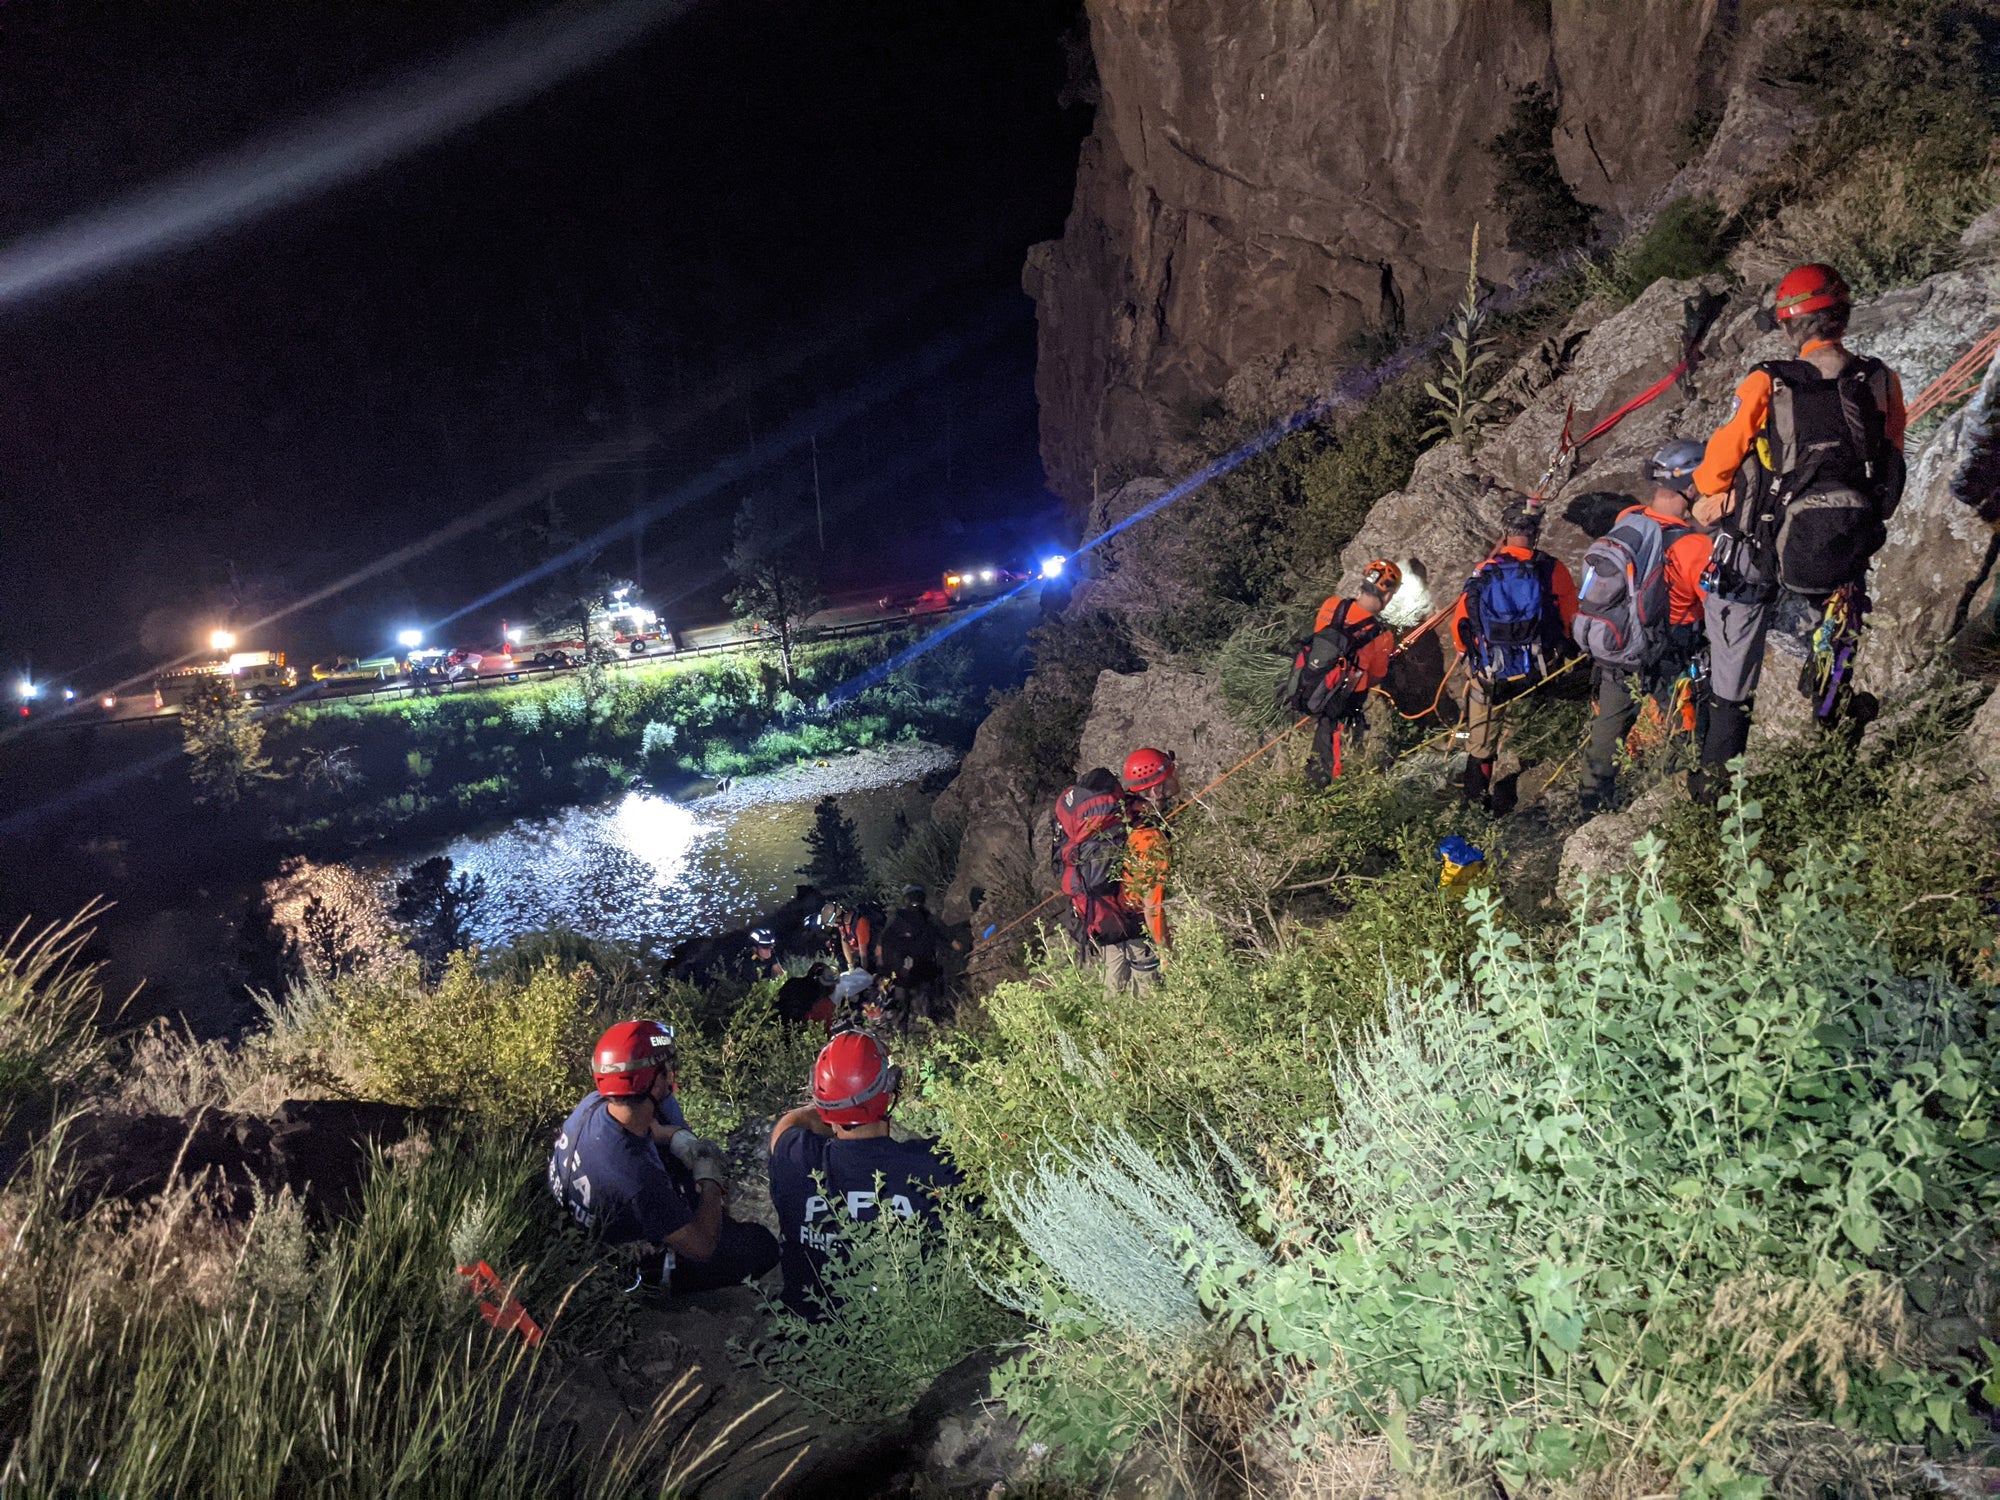 All Hands on Deck: Open Spinal Fracture in Poudre Canyon